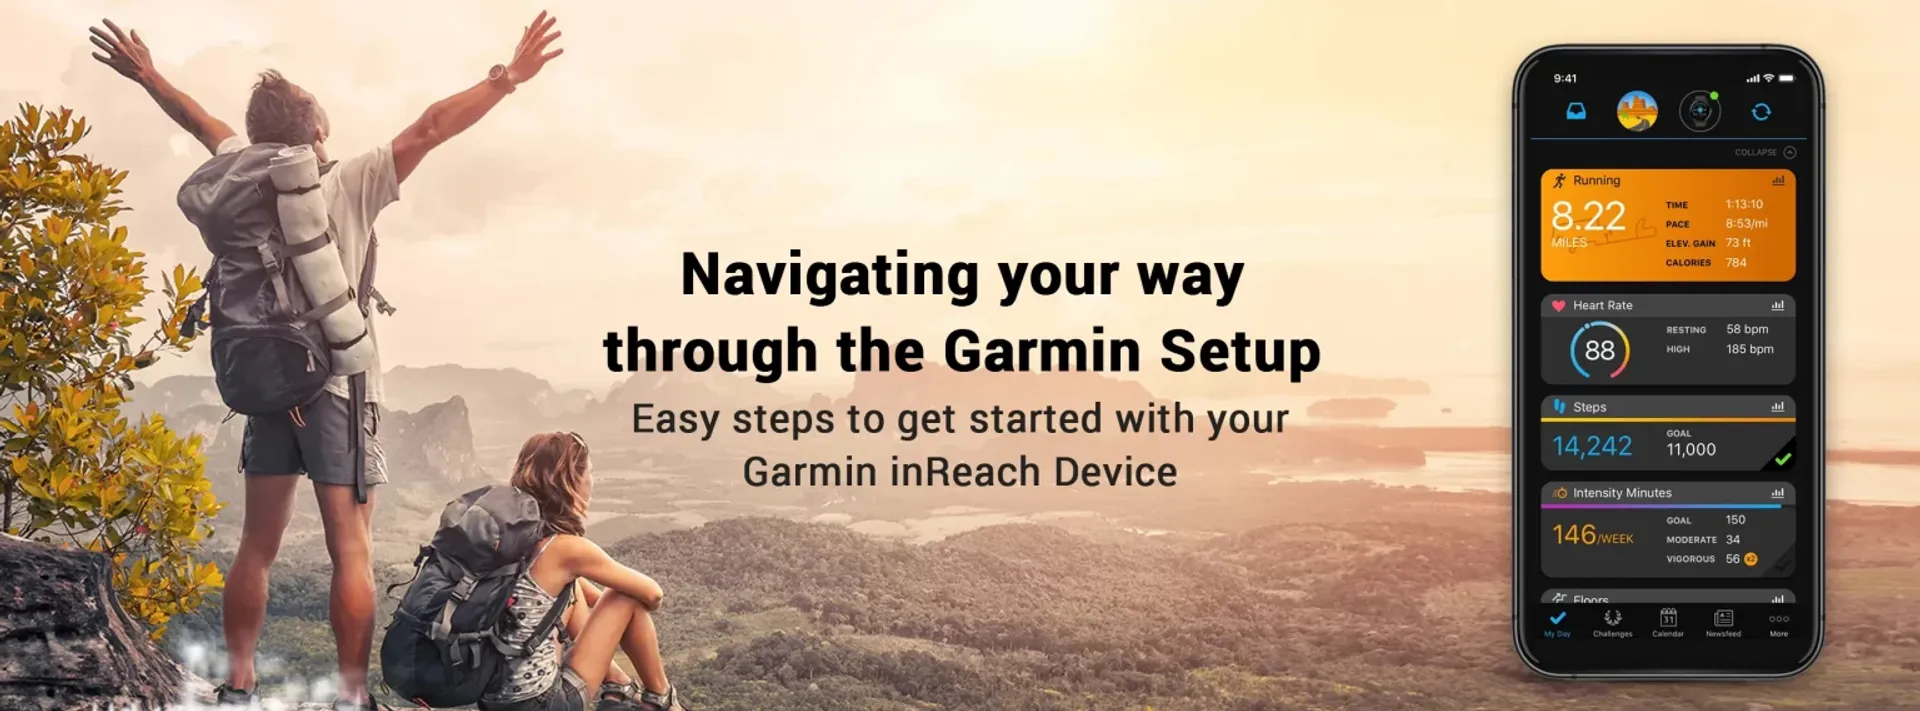 To proceed with the Garmin Inreach login, you must install the Garmin Inreach app on your smartphone. Through the app, you can log into the user interface easily. The app is available on both Play Store and App Store. Just install the app and log into your account details.

https://inreachlogin.com/